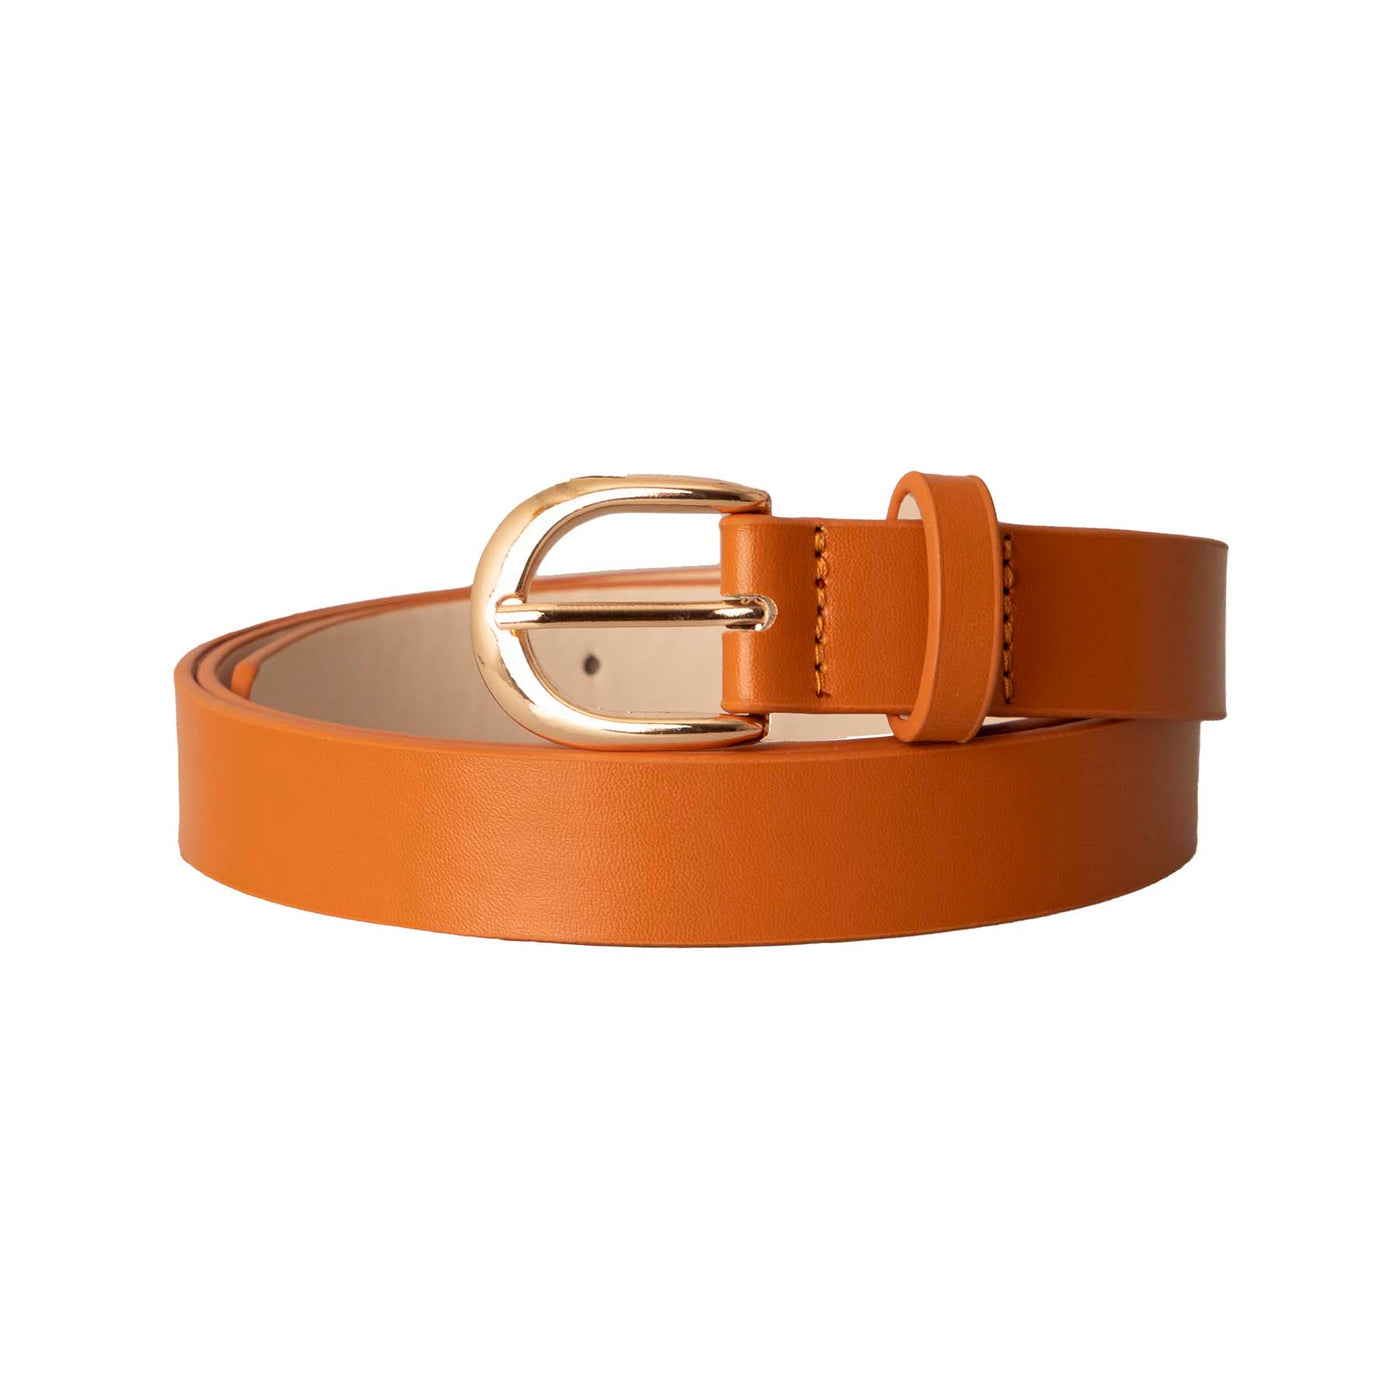 Sass Seema Belt with Gold Buckle in Tan